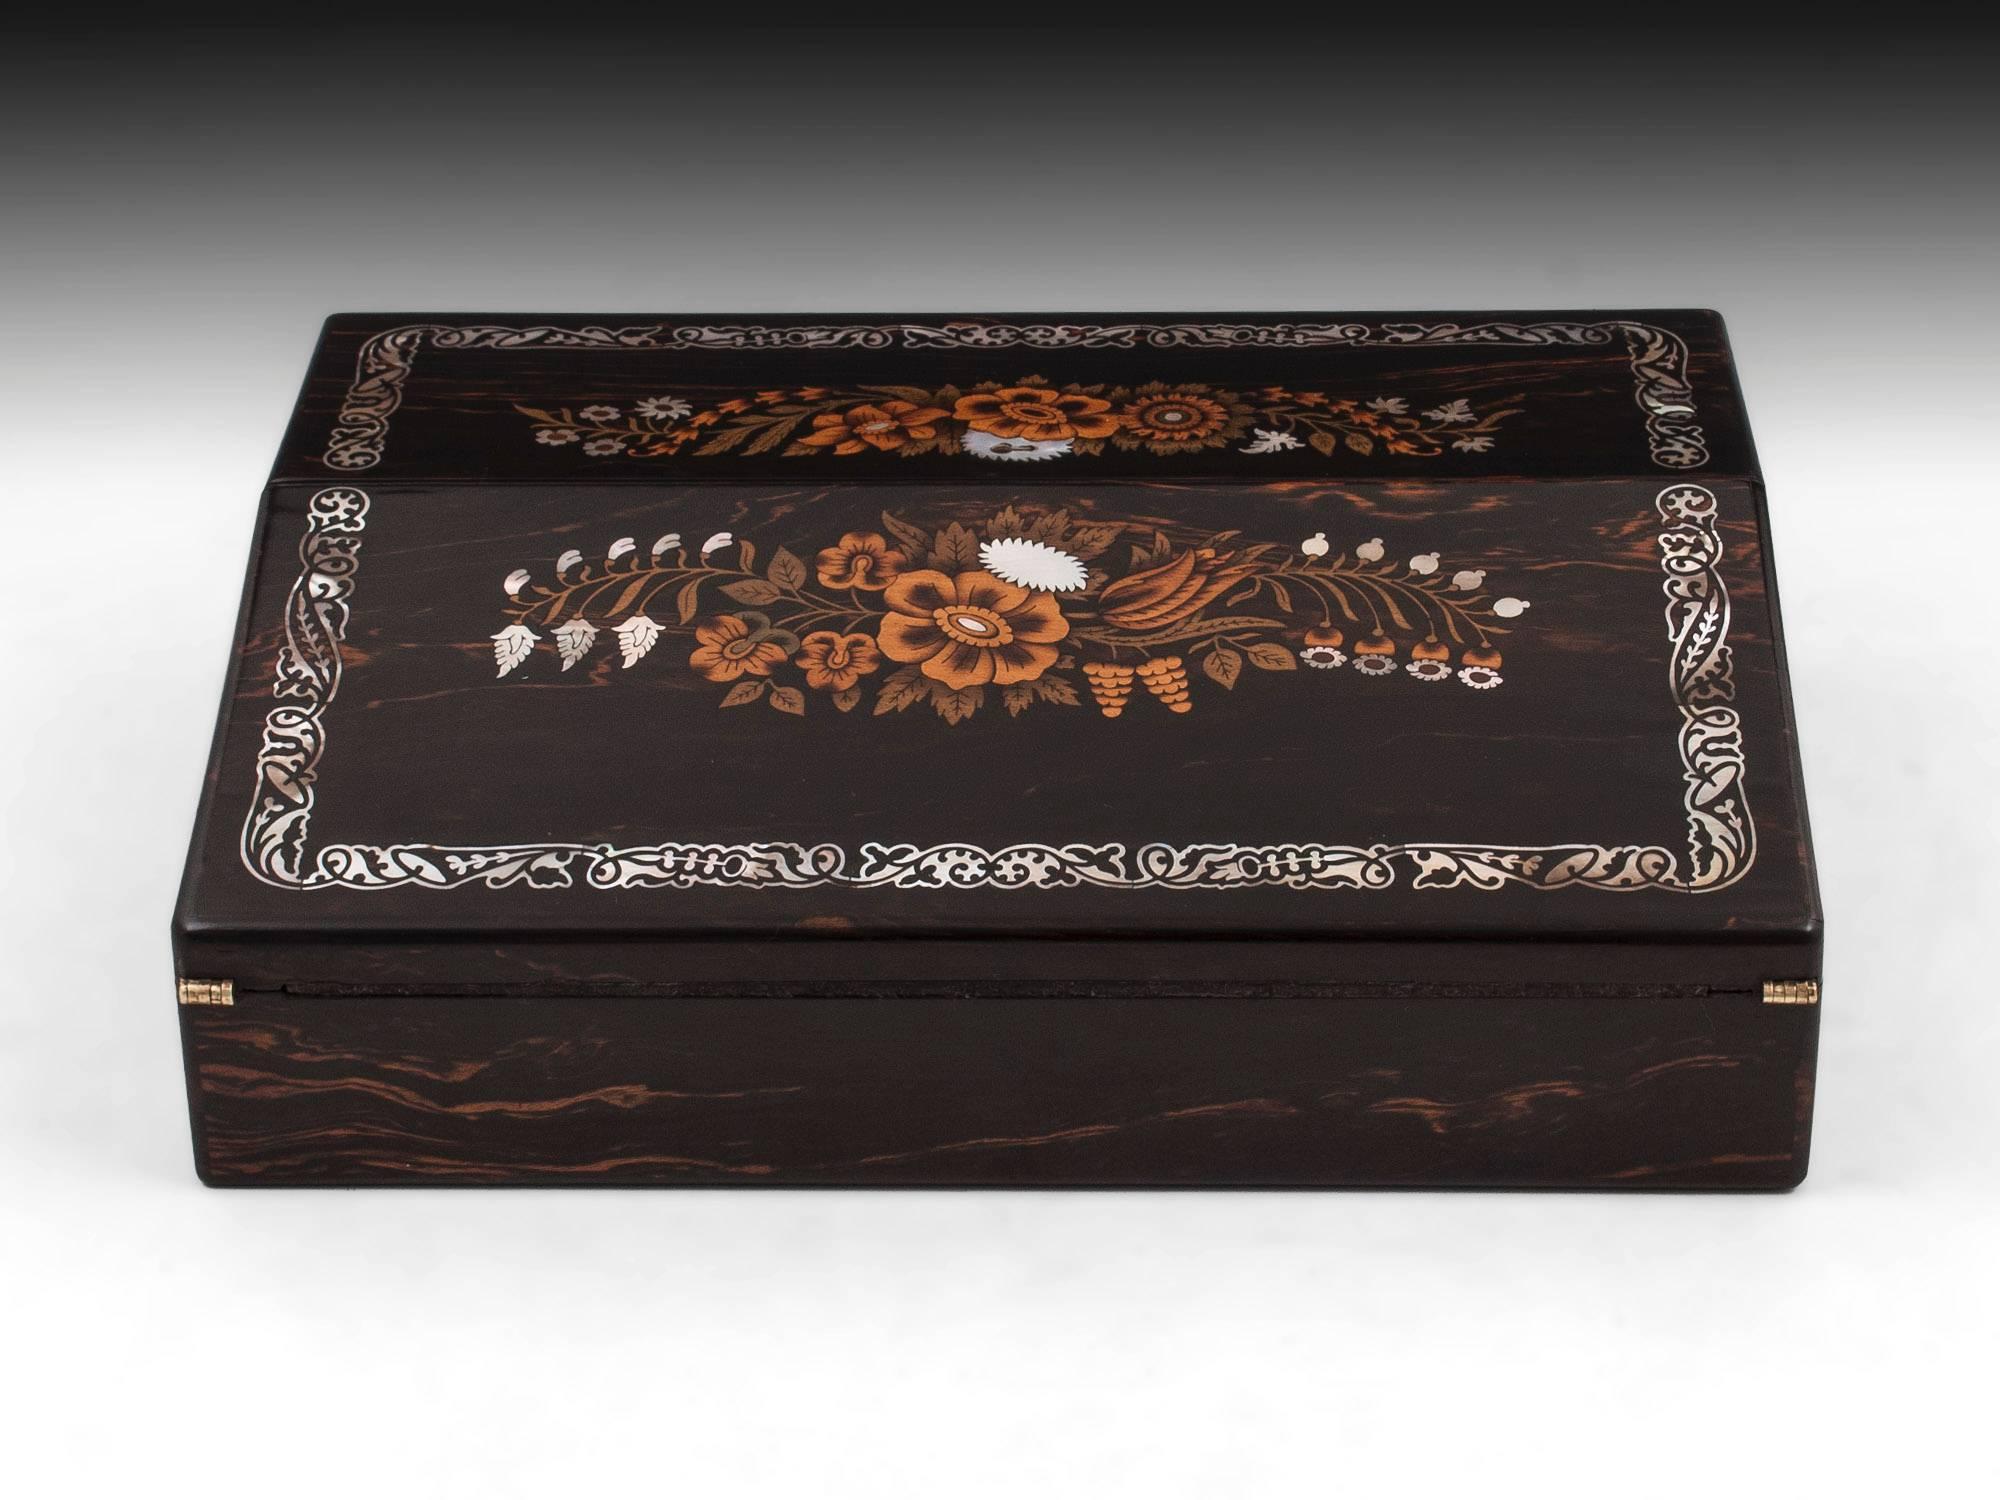 Coromandel and satinwood writing box with beautiful floral inlays comprising of mother-of-pearl and boxwood. 

On opening this exquisite antique writing slope it reveals a dark green leather writing surface with gold tooling. The top half of which